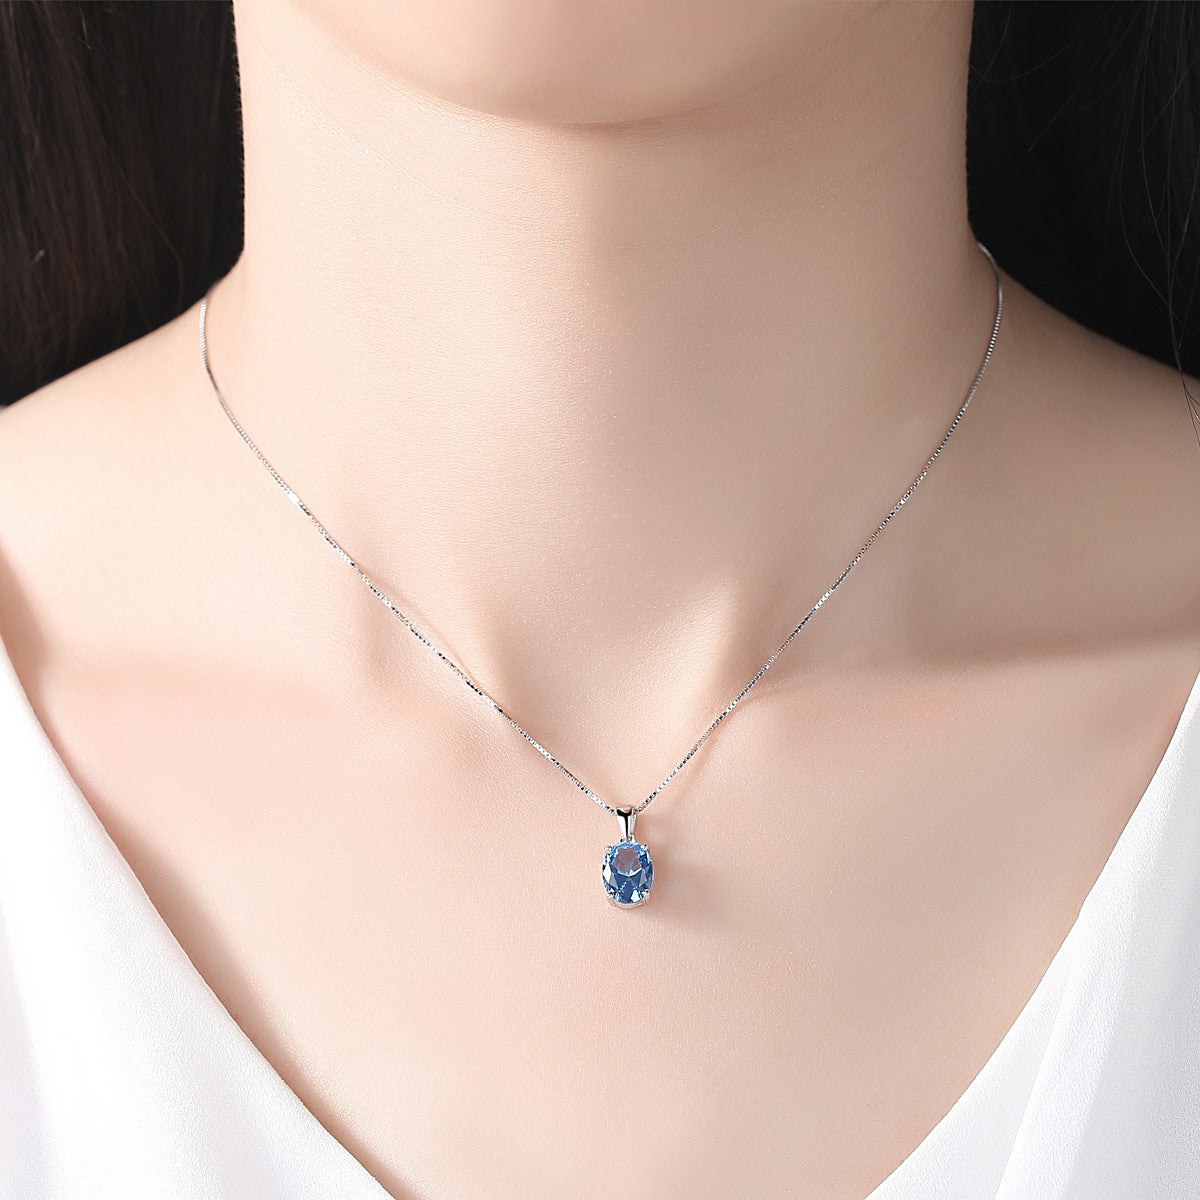 Gemstonely- Blue Topaz Pendant 925 Silver Necklace for Women with Minimalist Design